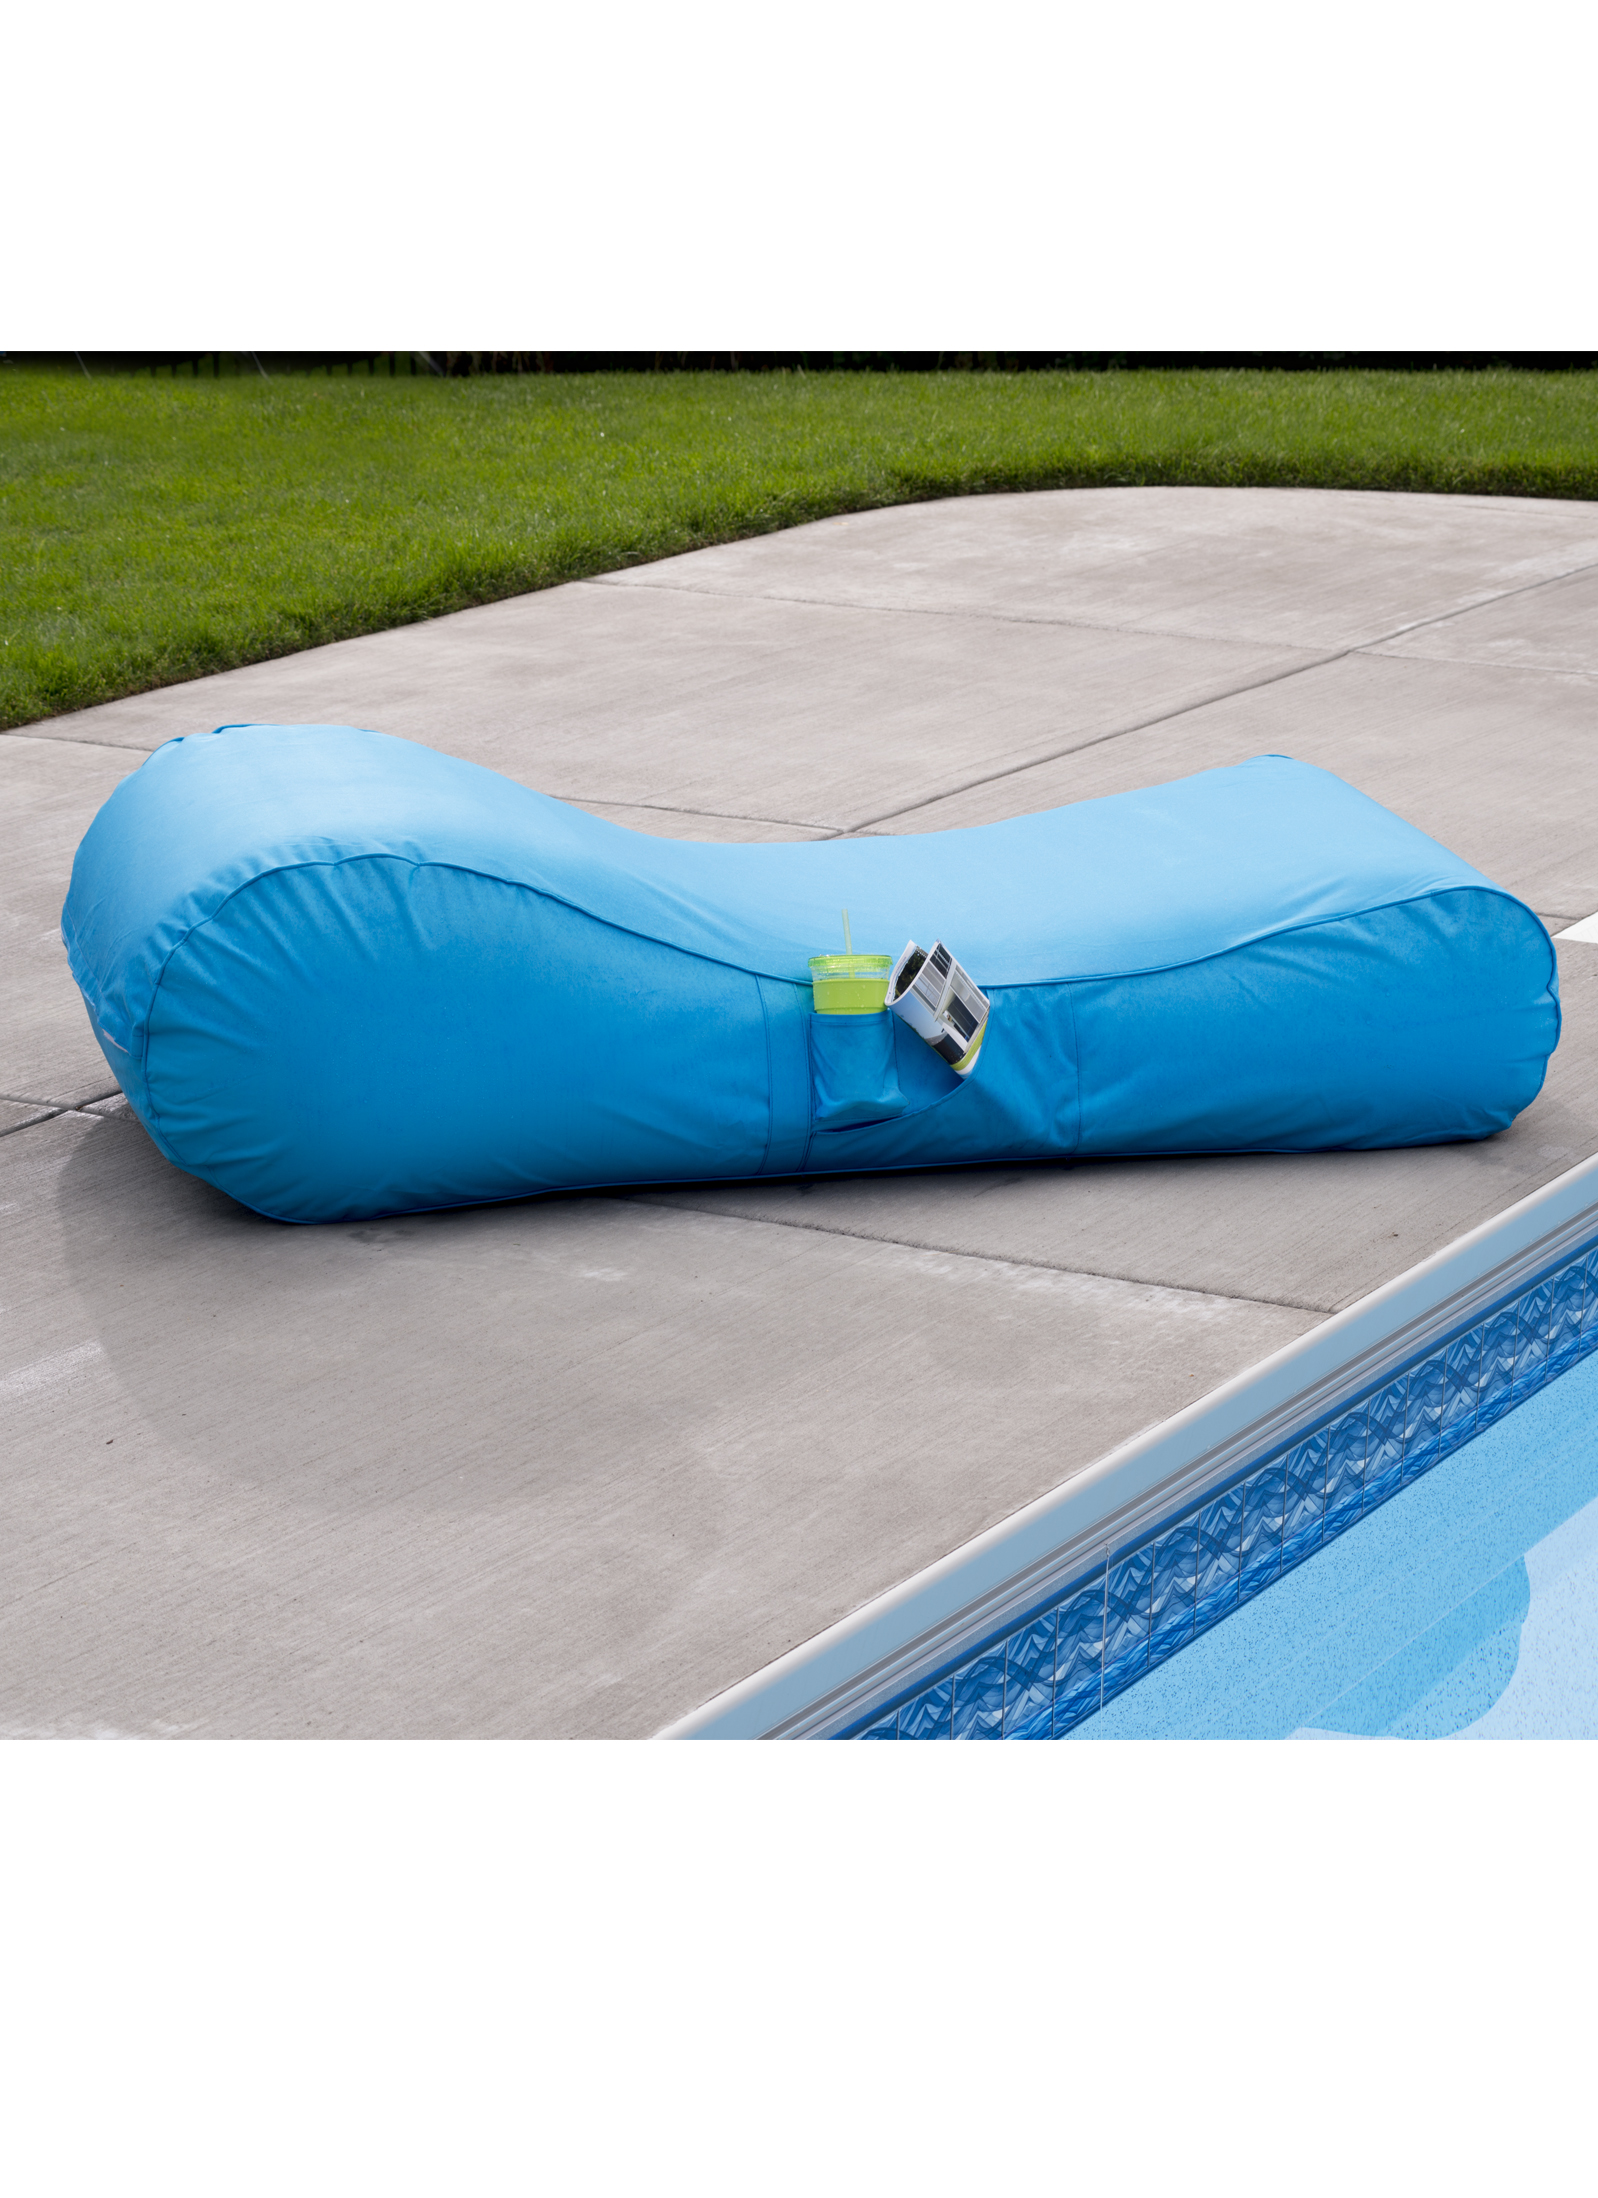 Capri Inflatable Lounger Turquoise - TOYS & GAMES